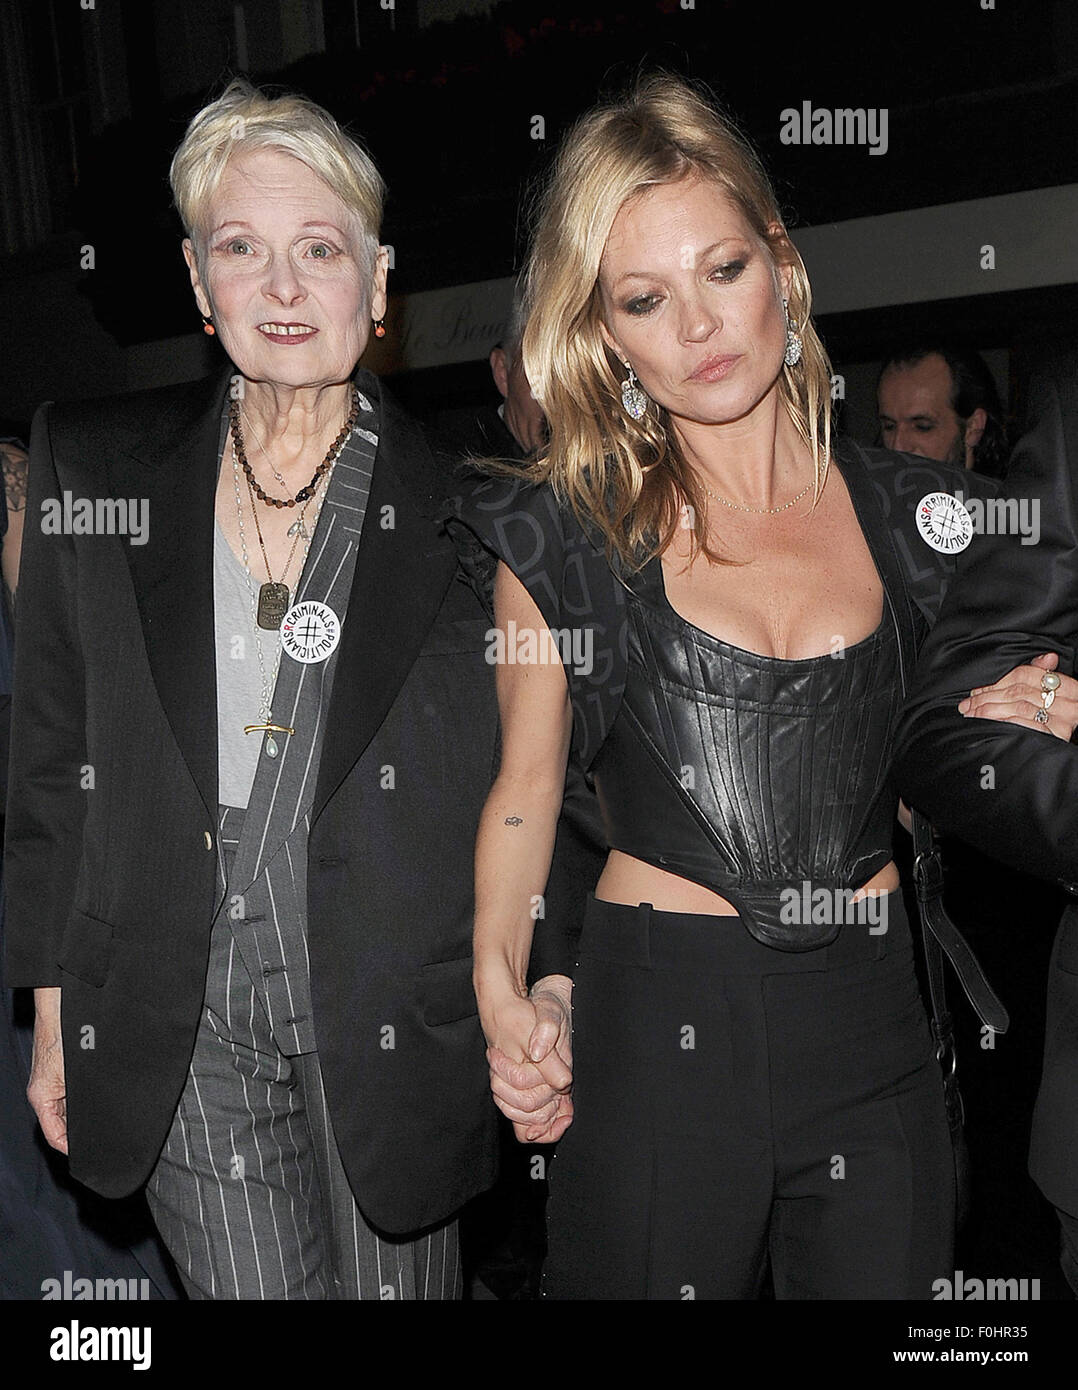 Kate Moss and Dame Vivienne Westwood arrive at Lou Lou's private members  club in Mayfair. It was the first time Kate had been pictured since she hit  the headlines for abusing staff